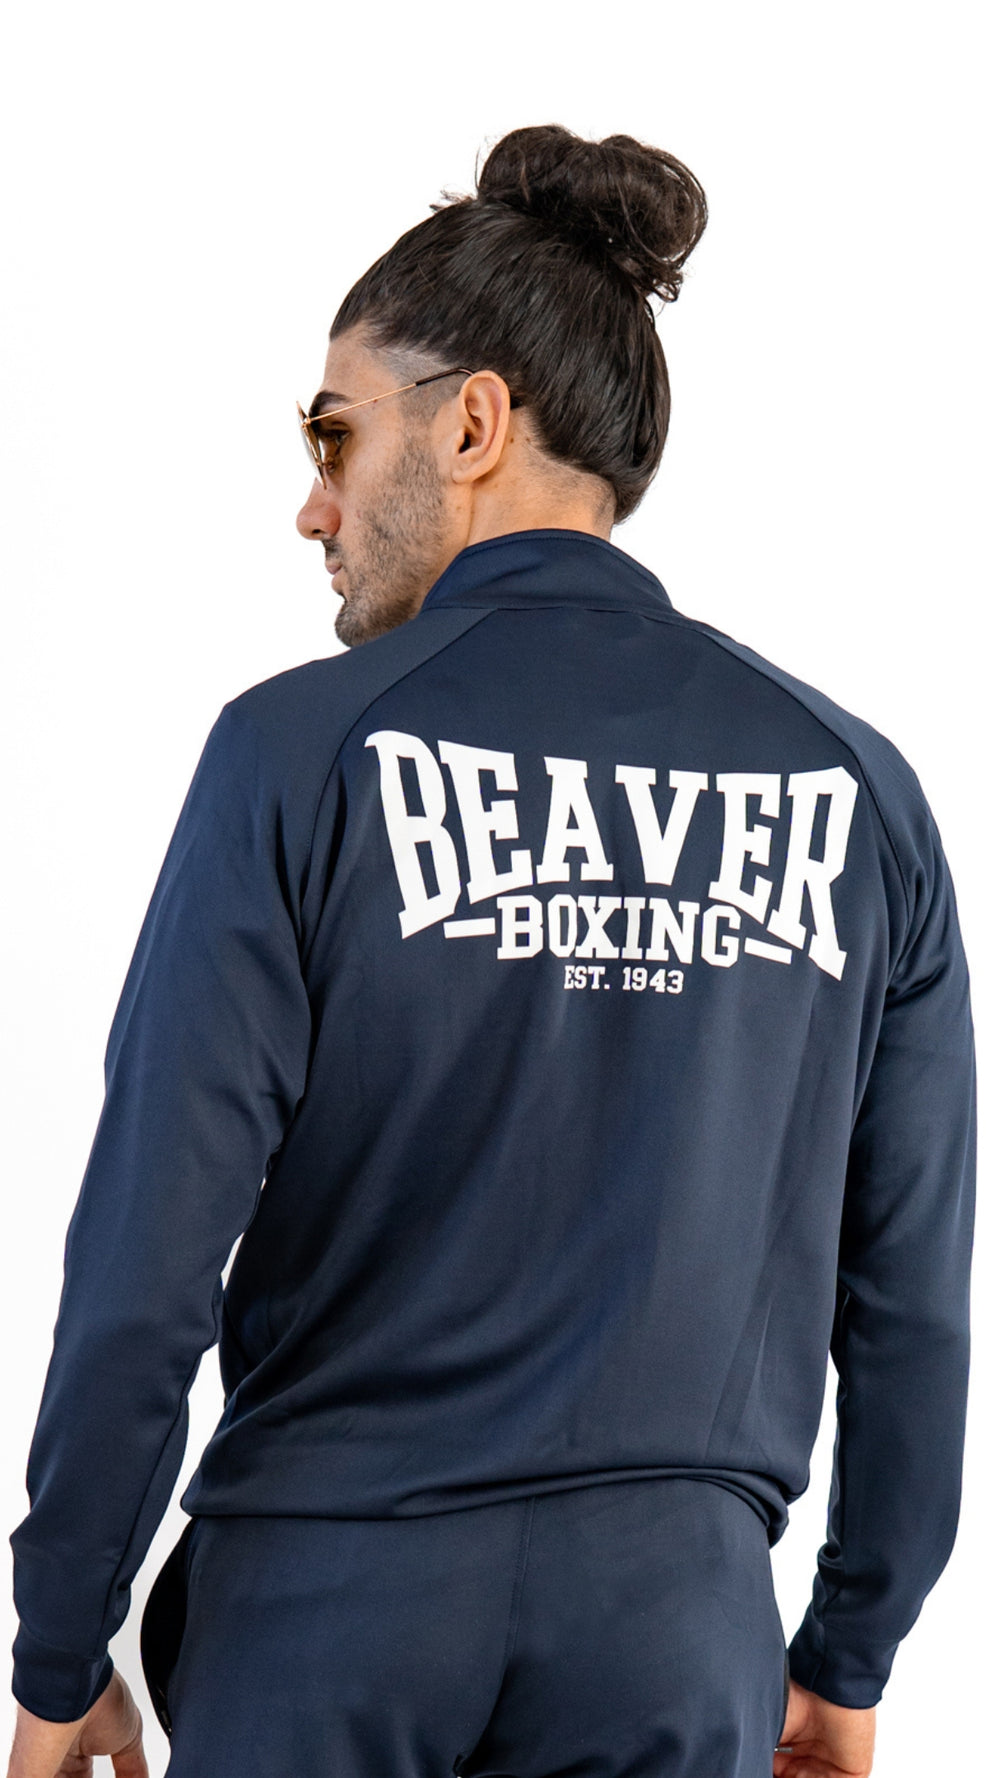 BEAVER BOXING TRACKSUIT TOP - NAVY